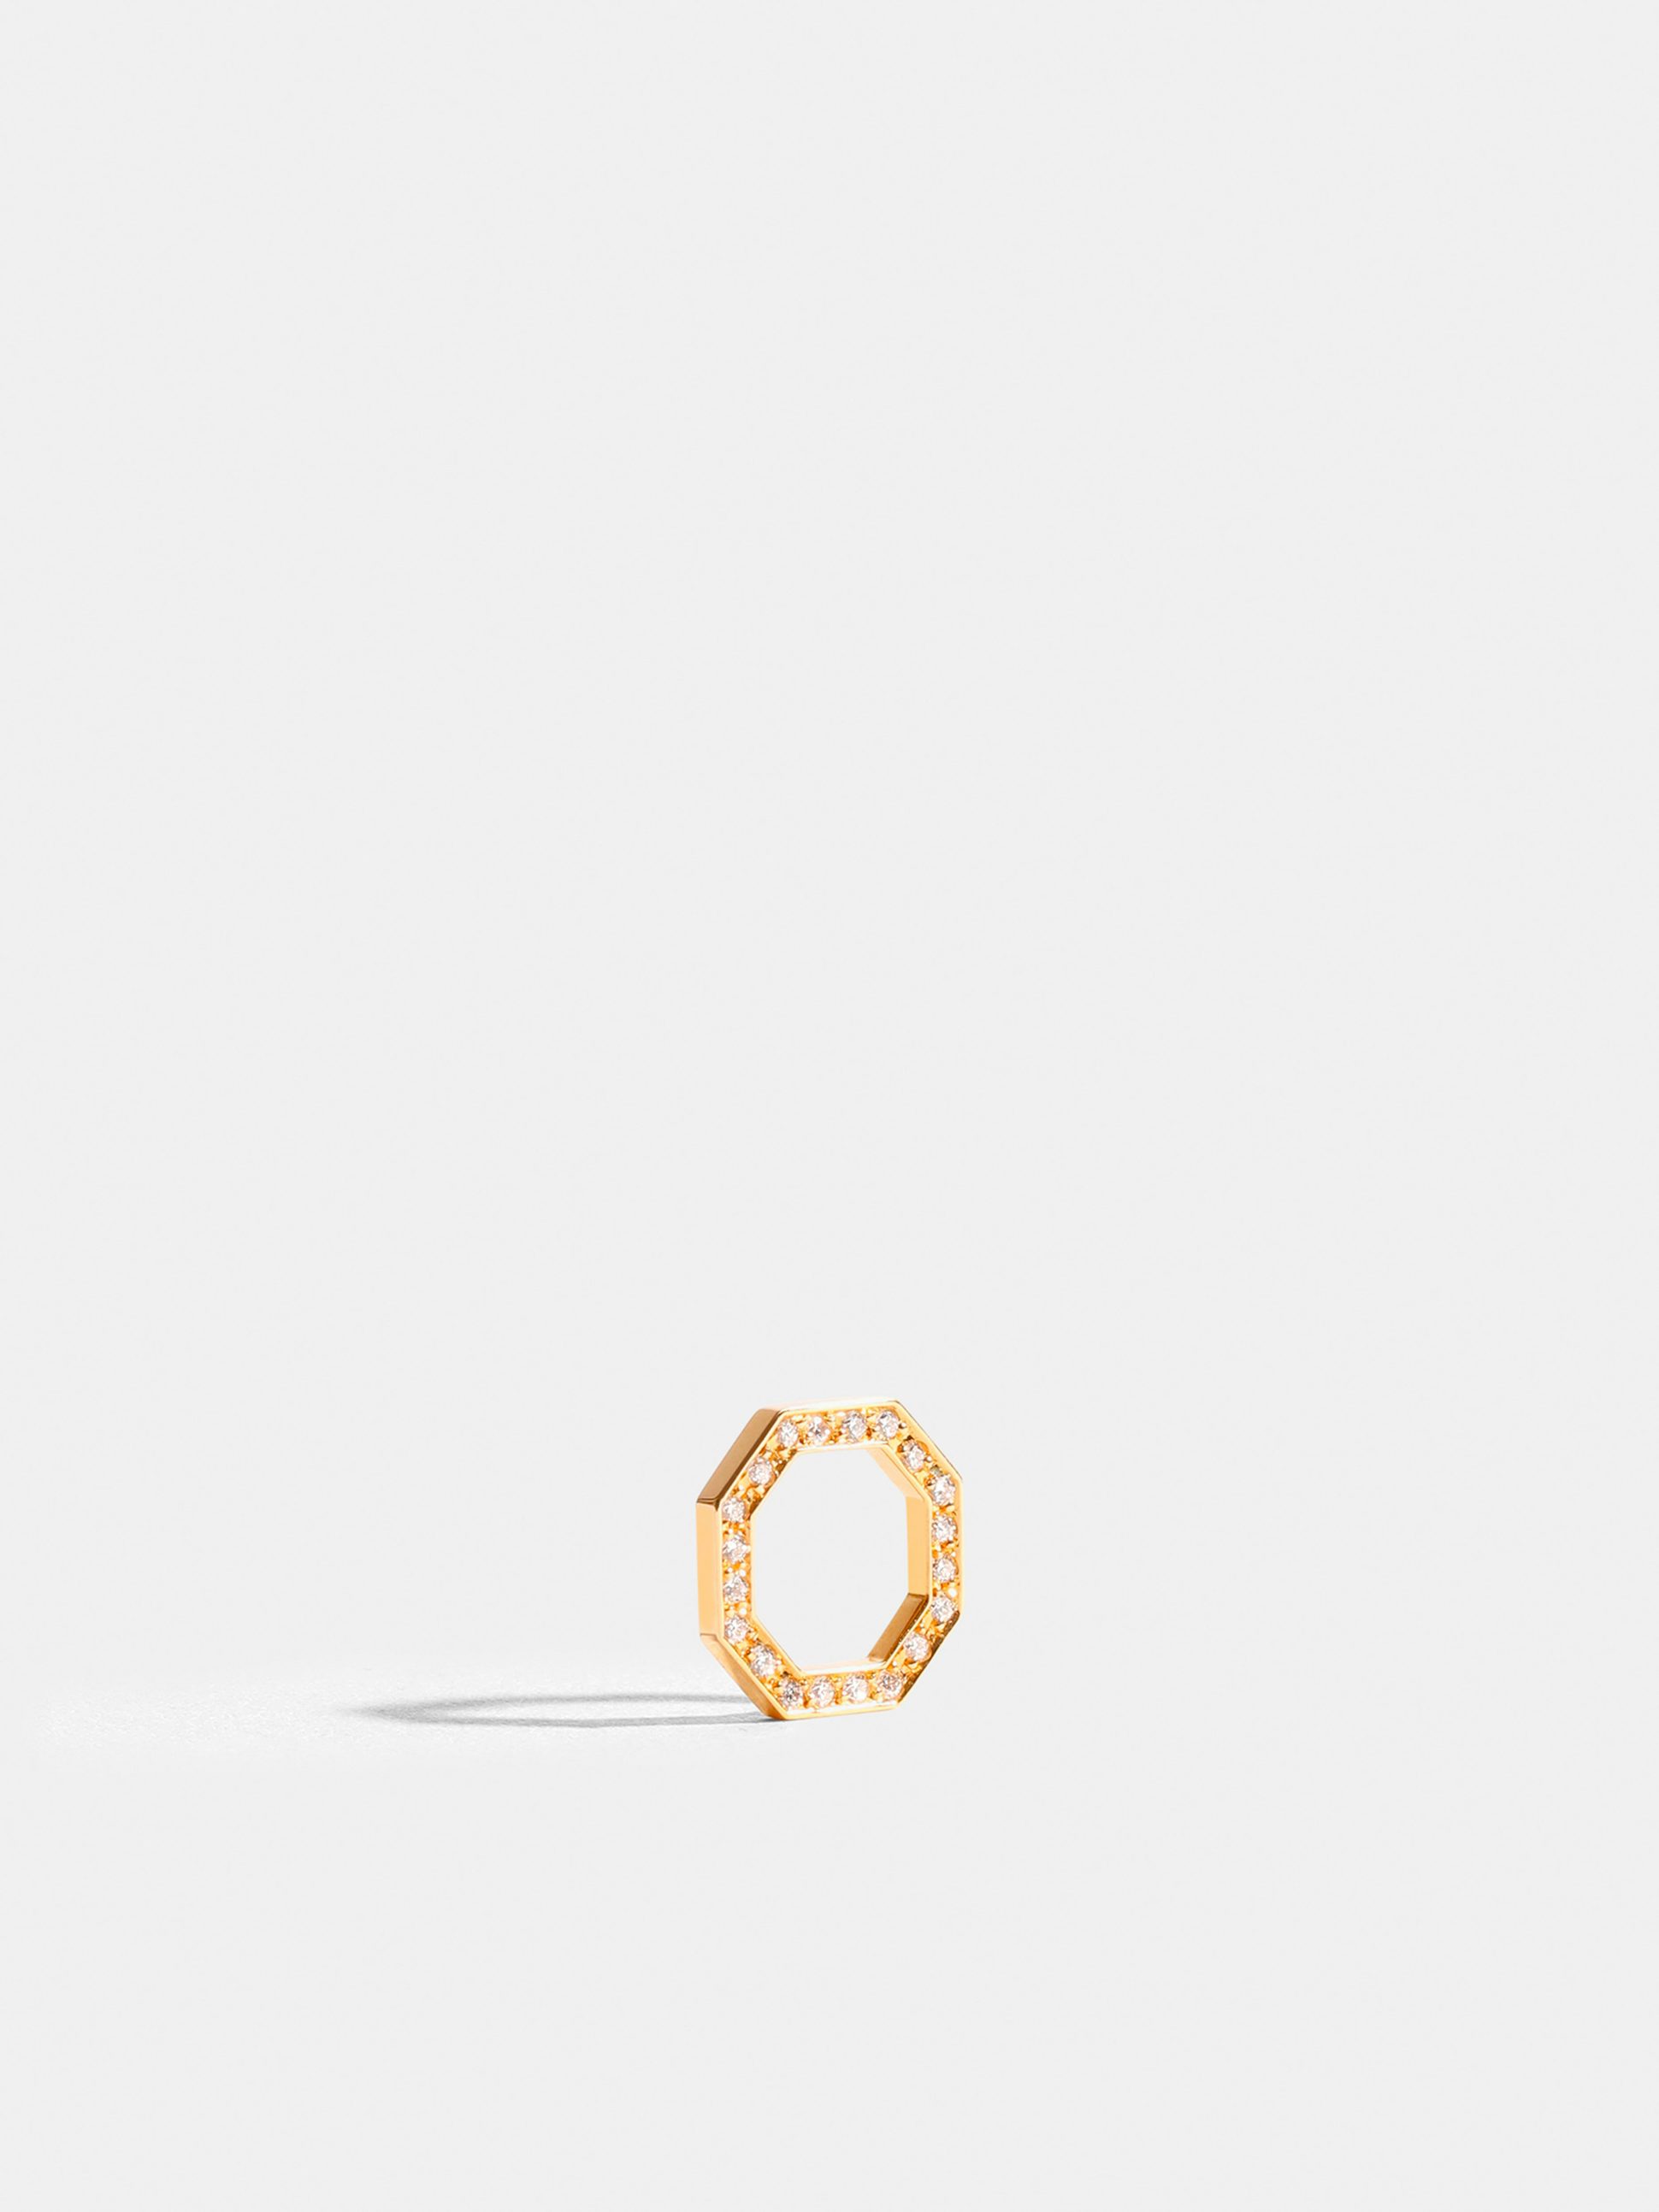 Octogone motif in 18k Fairmined ethical yellow gold, paved with lab-grown diamonds, on a carmine red cord.